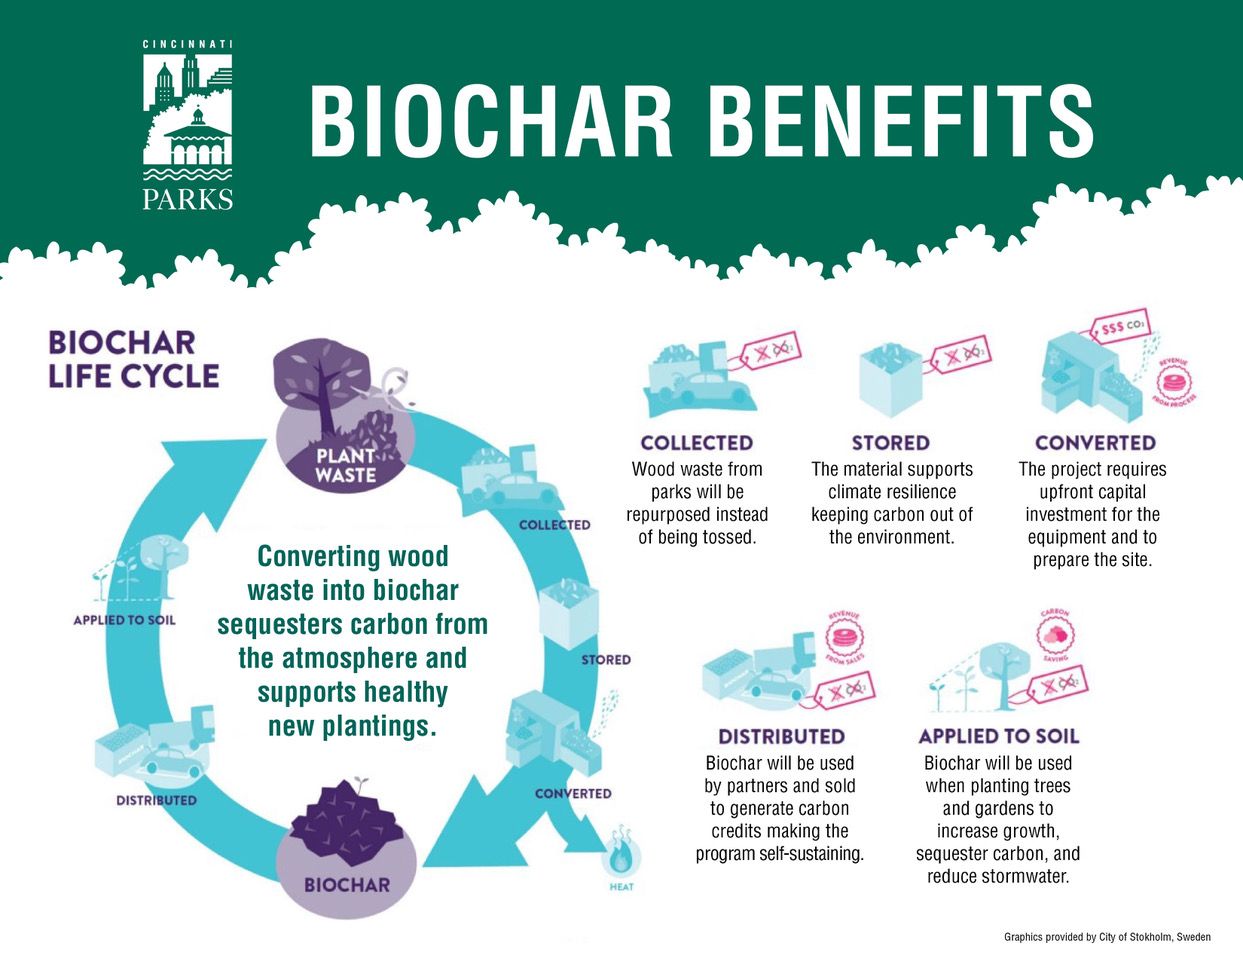 A graphic from Cincinnati Parks showing the benefits of biochar. (Image courtesy of Cincinnati Parks)